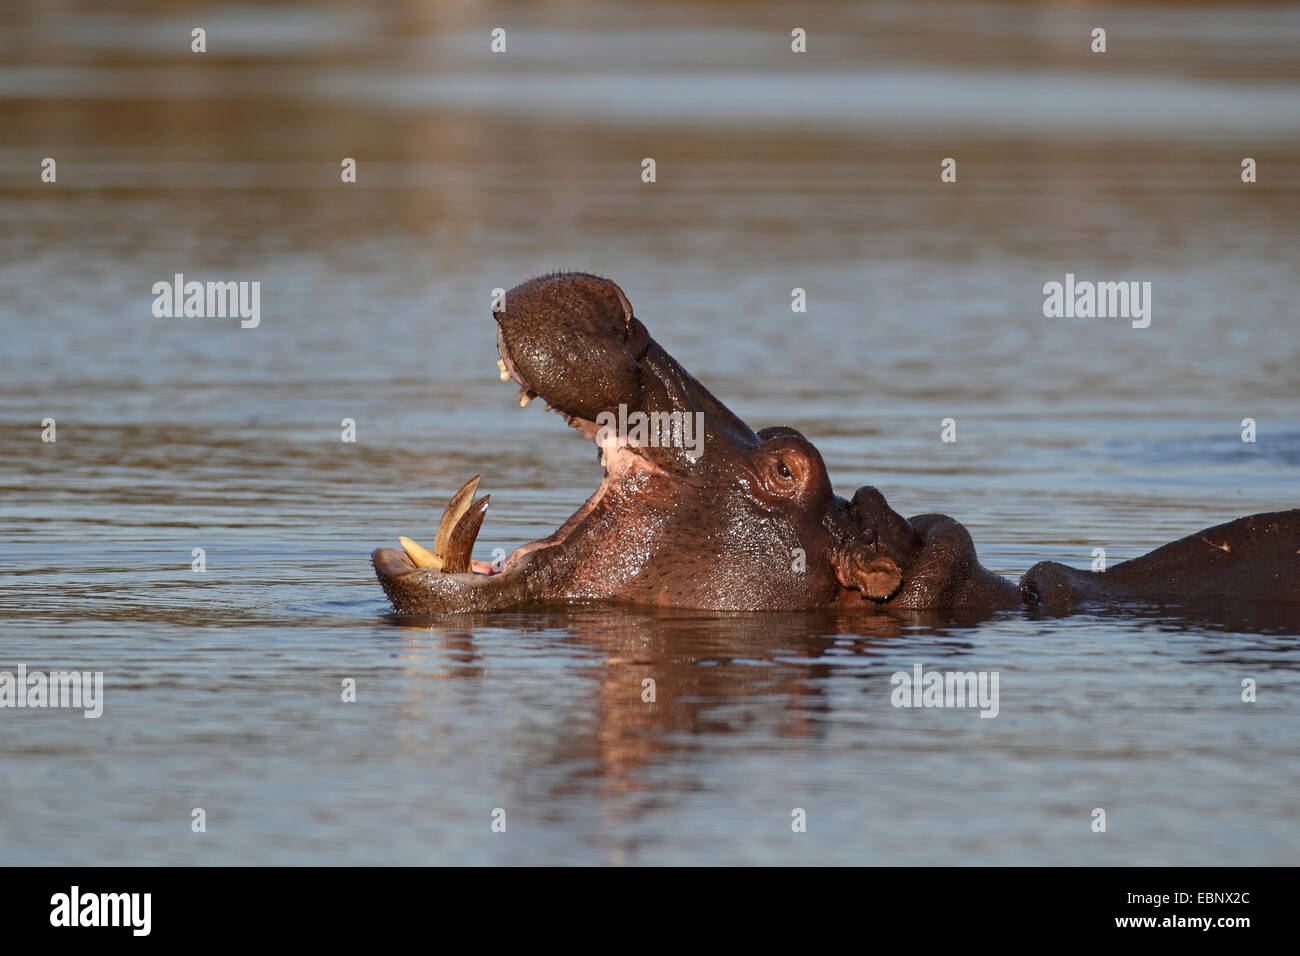 hippopotamus, hippo, Common hippopotamus (Hippopotamus amphibius), swimming with open mouth, South Africa, Kruger National Park Stock Photo